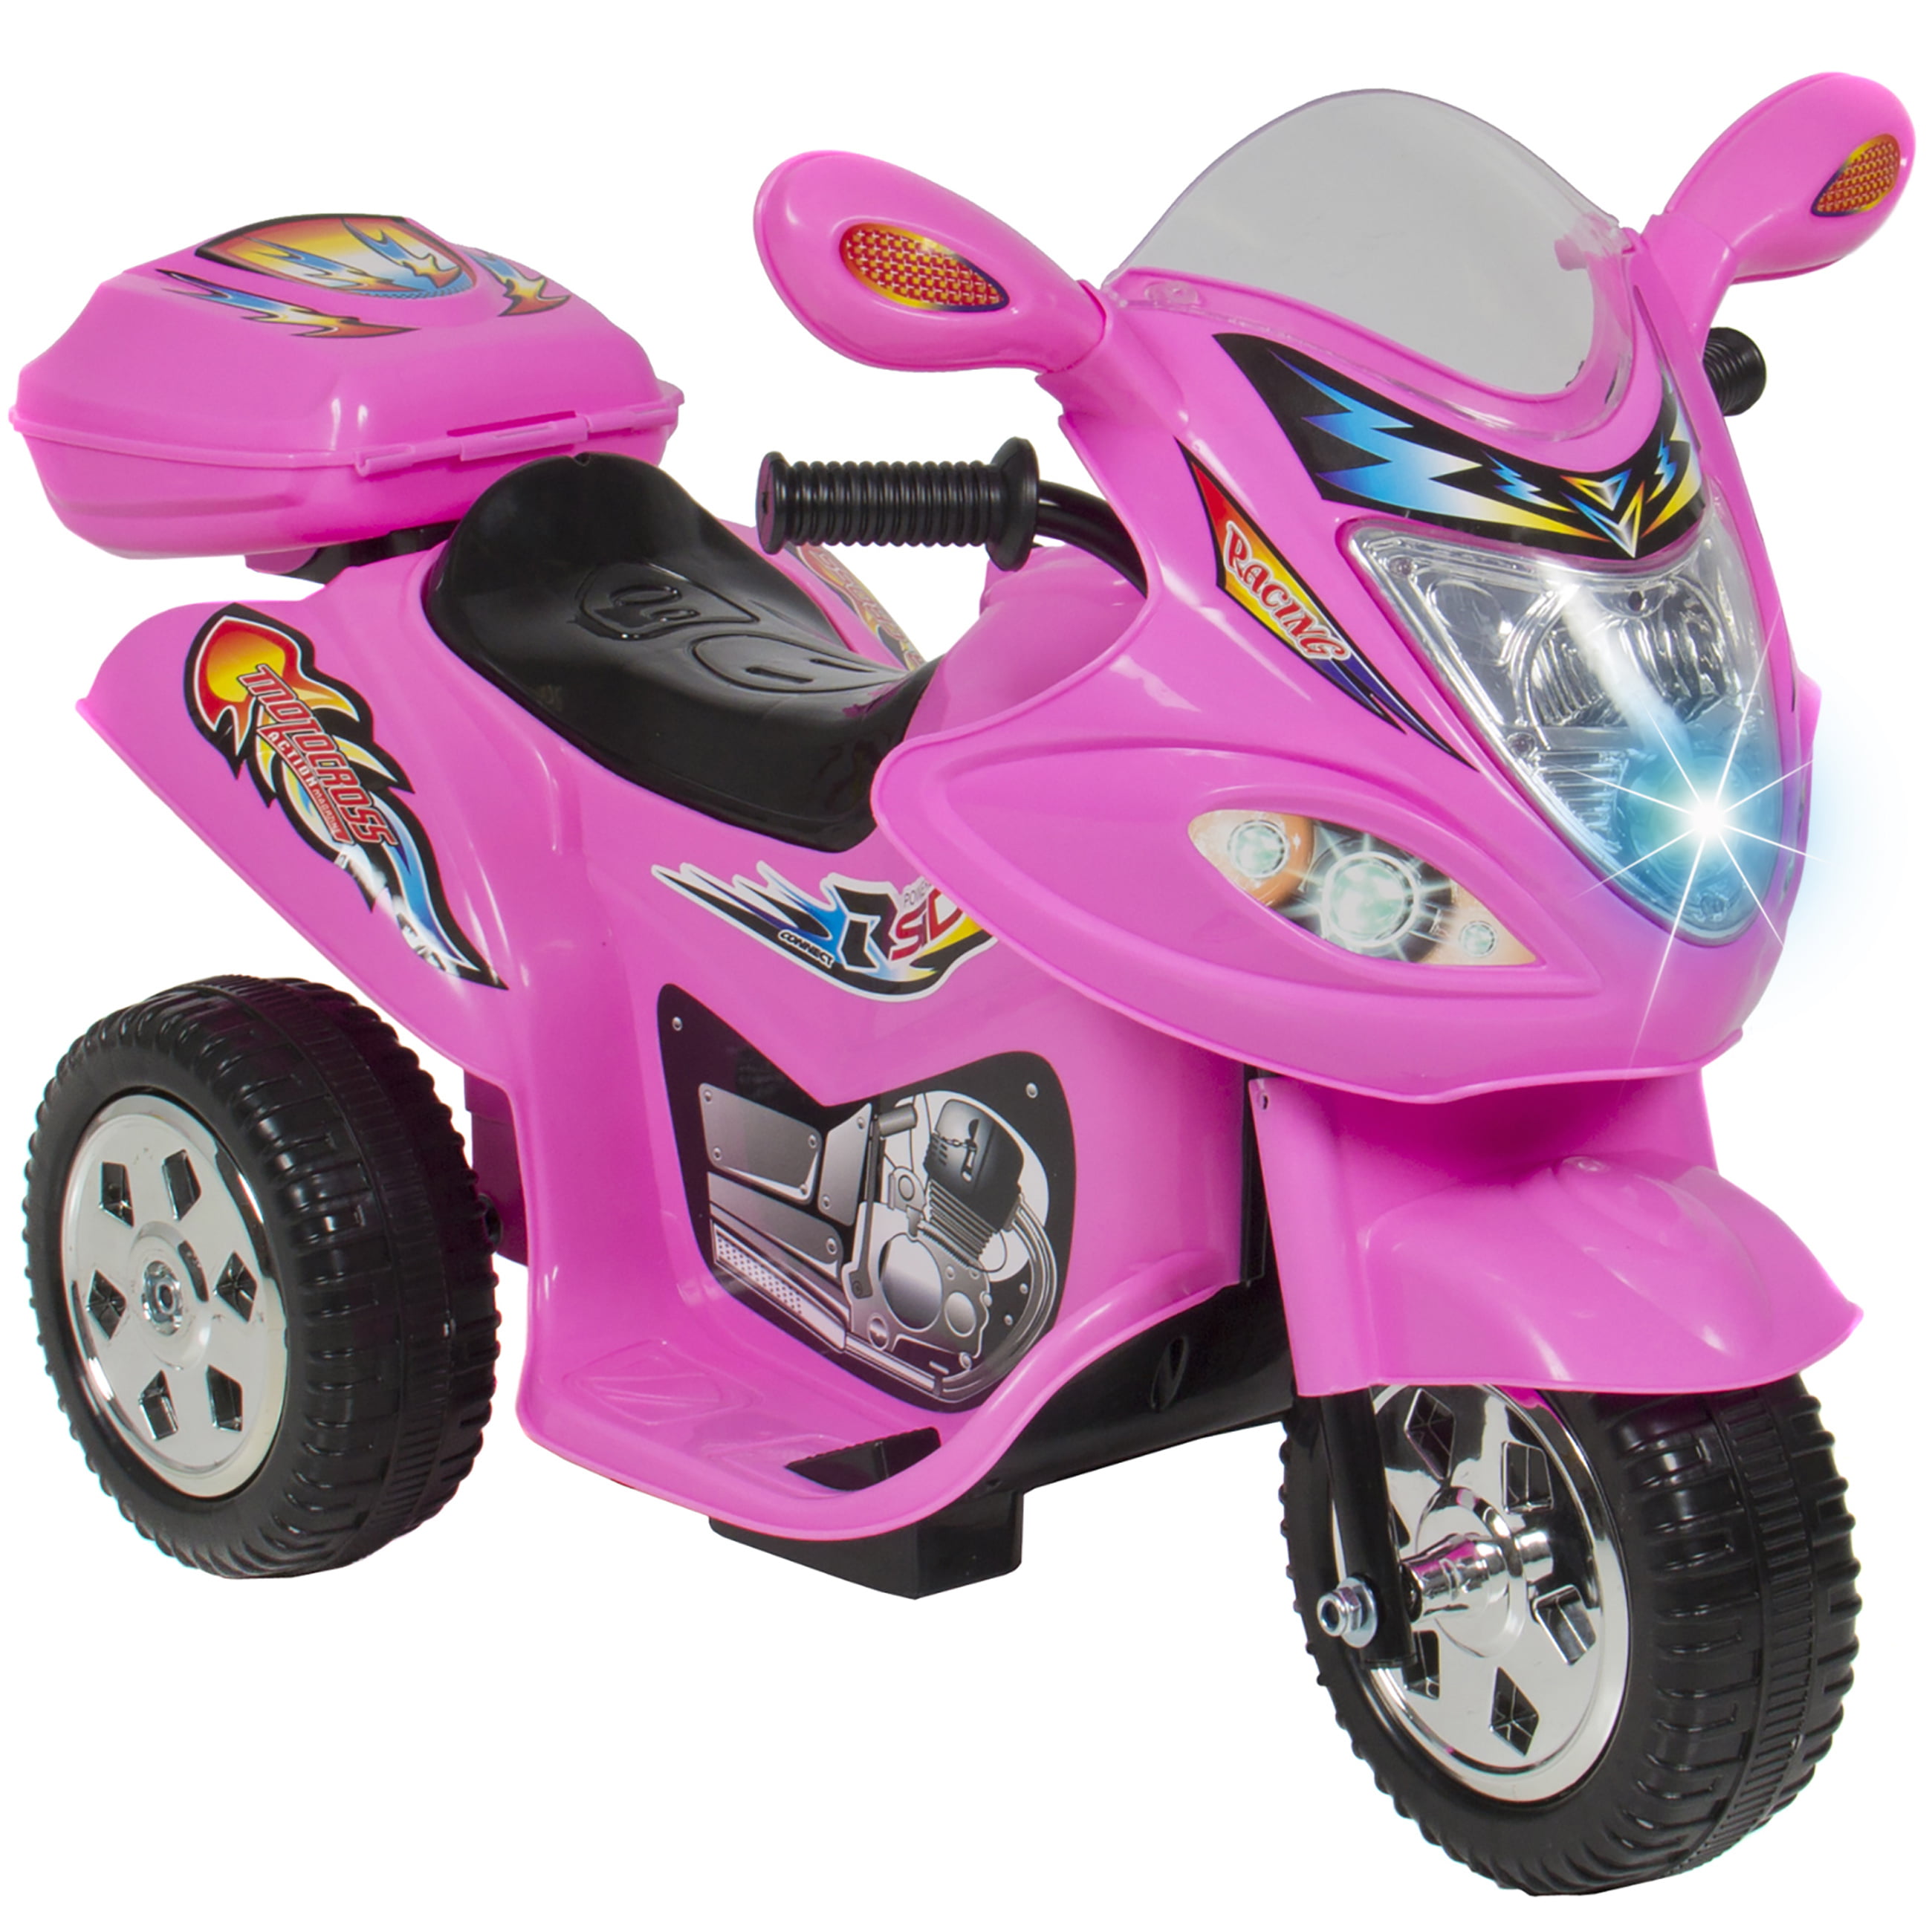 power bike for toddlers